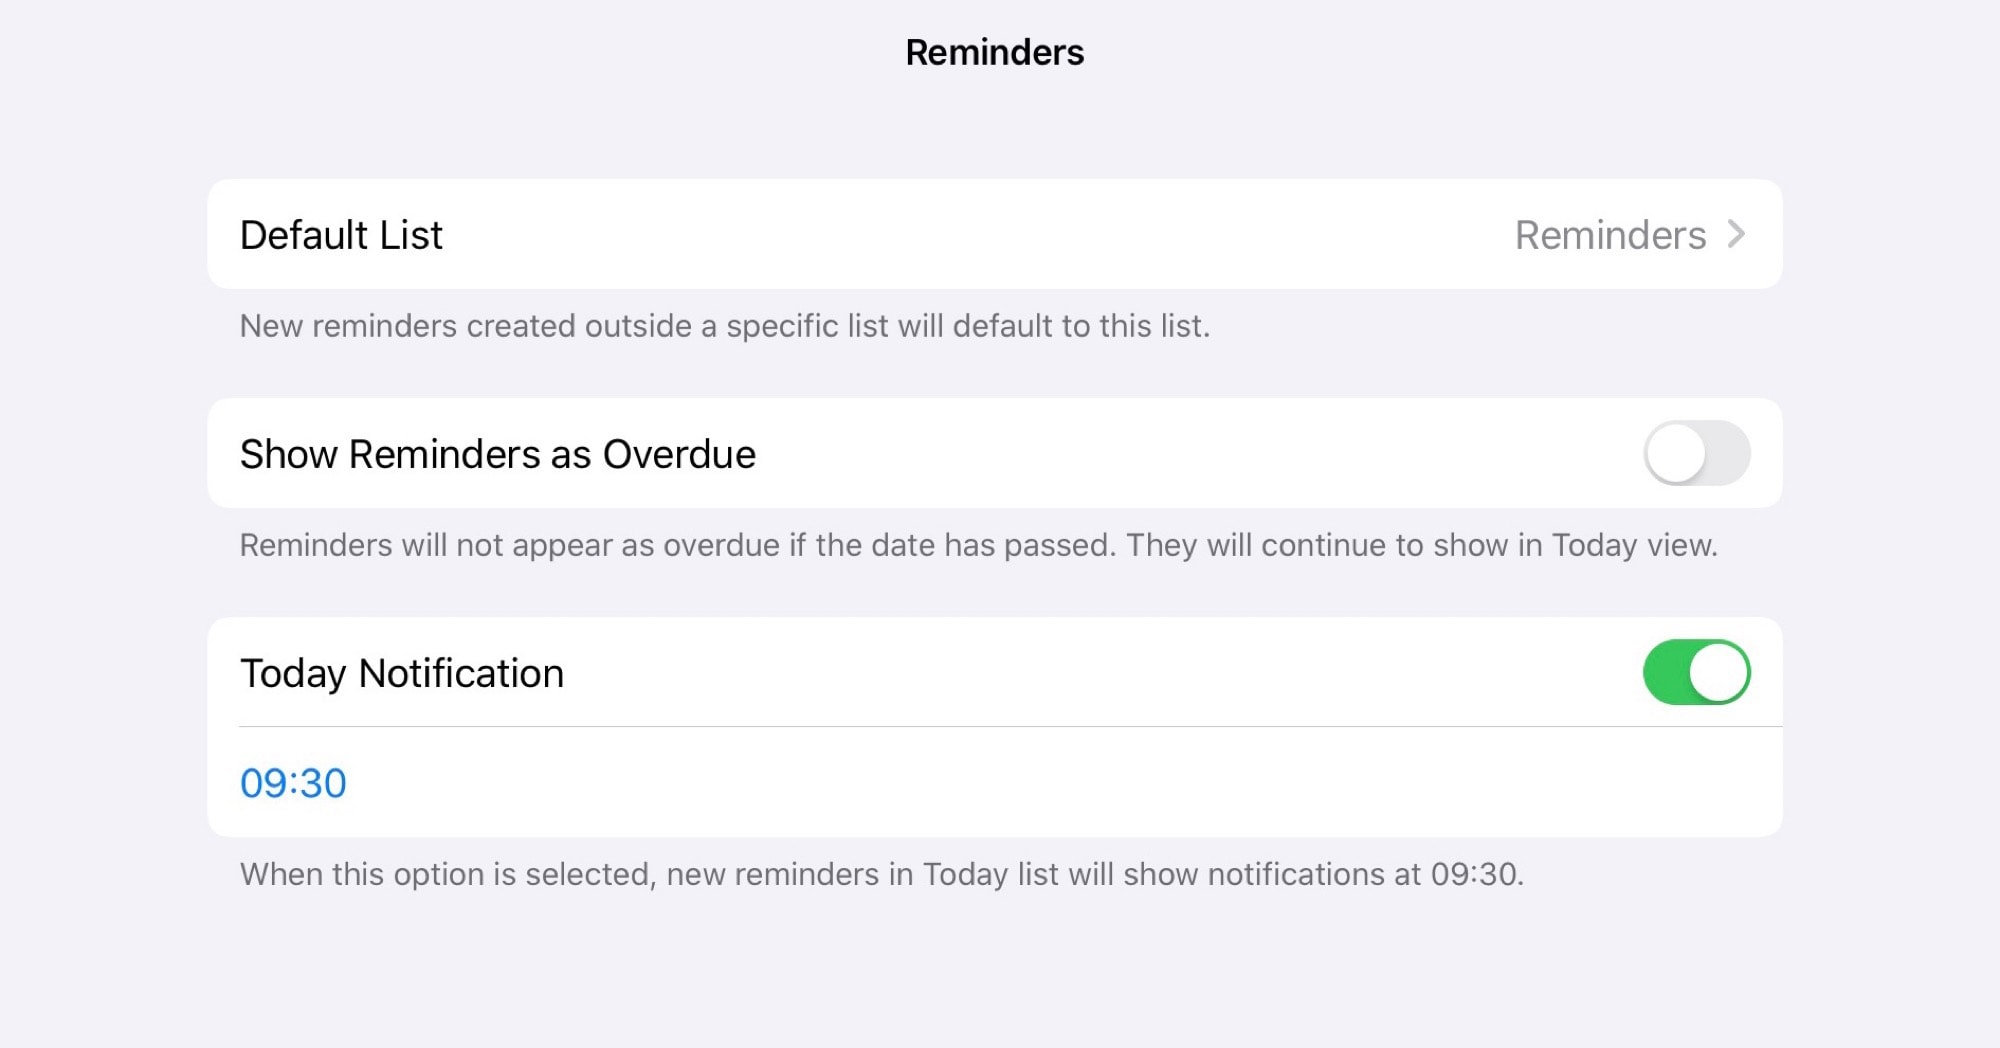 The Reminders app preference settings in iOS 13. That's more like it. 